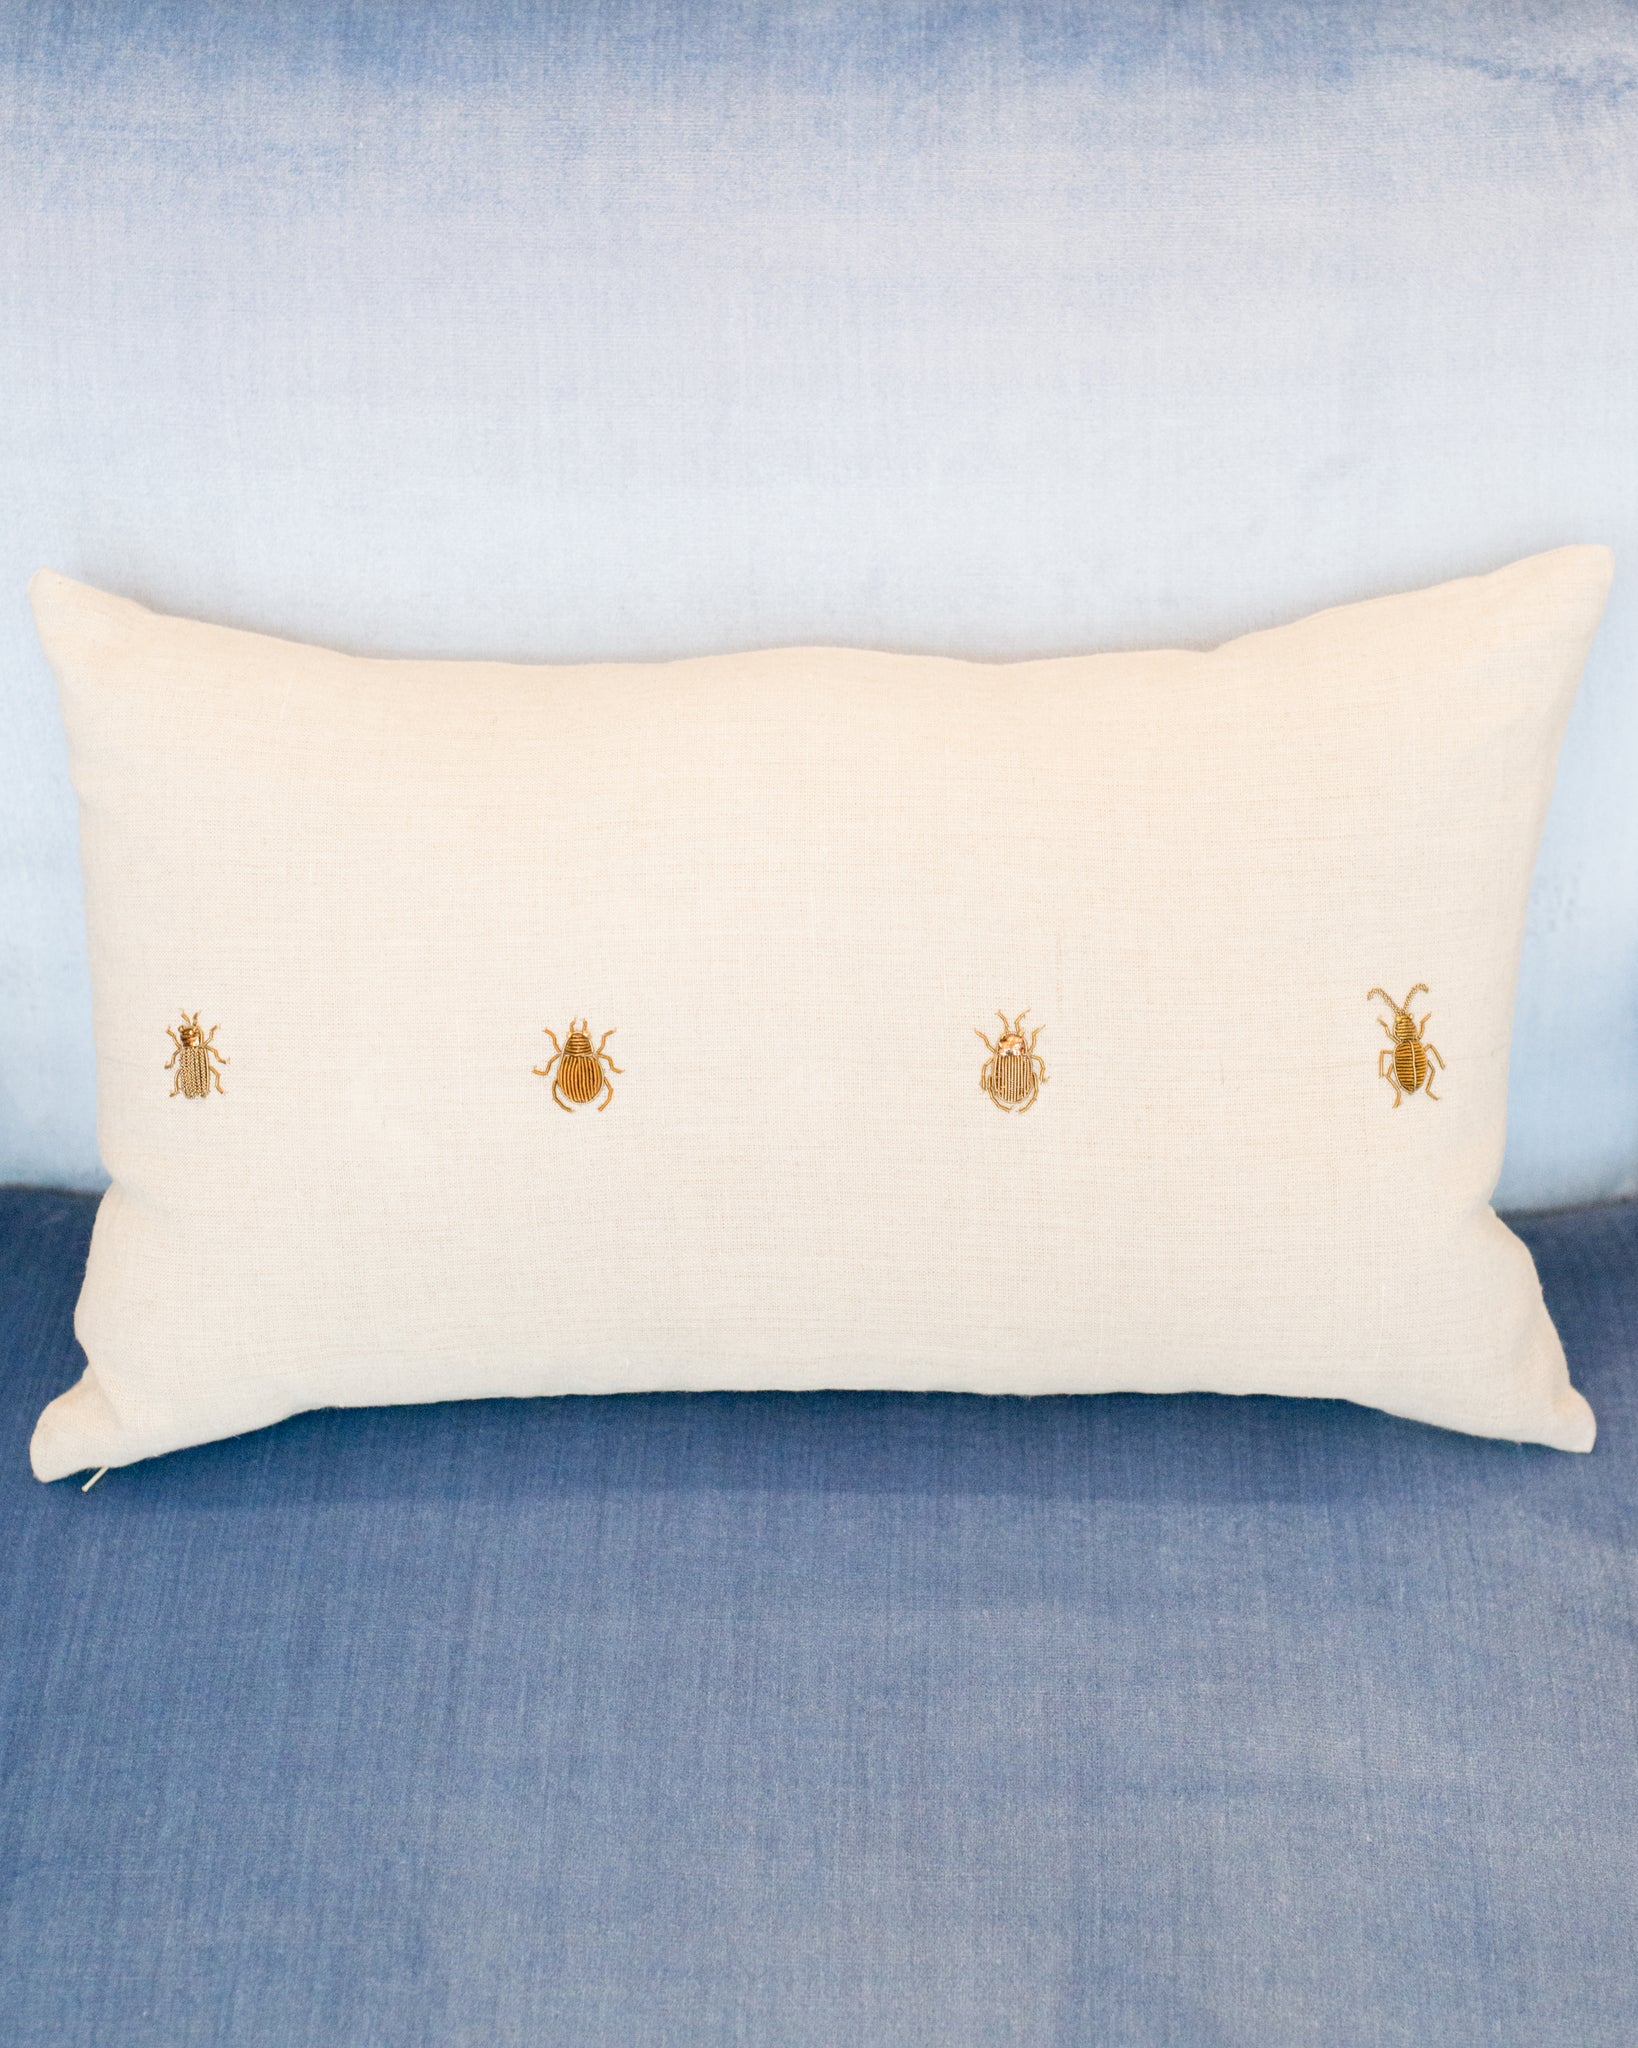 4 INSECTS ON A LINEN PILLOW